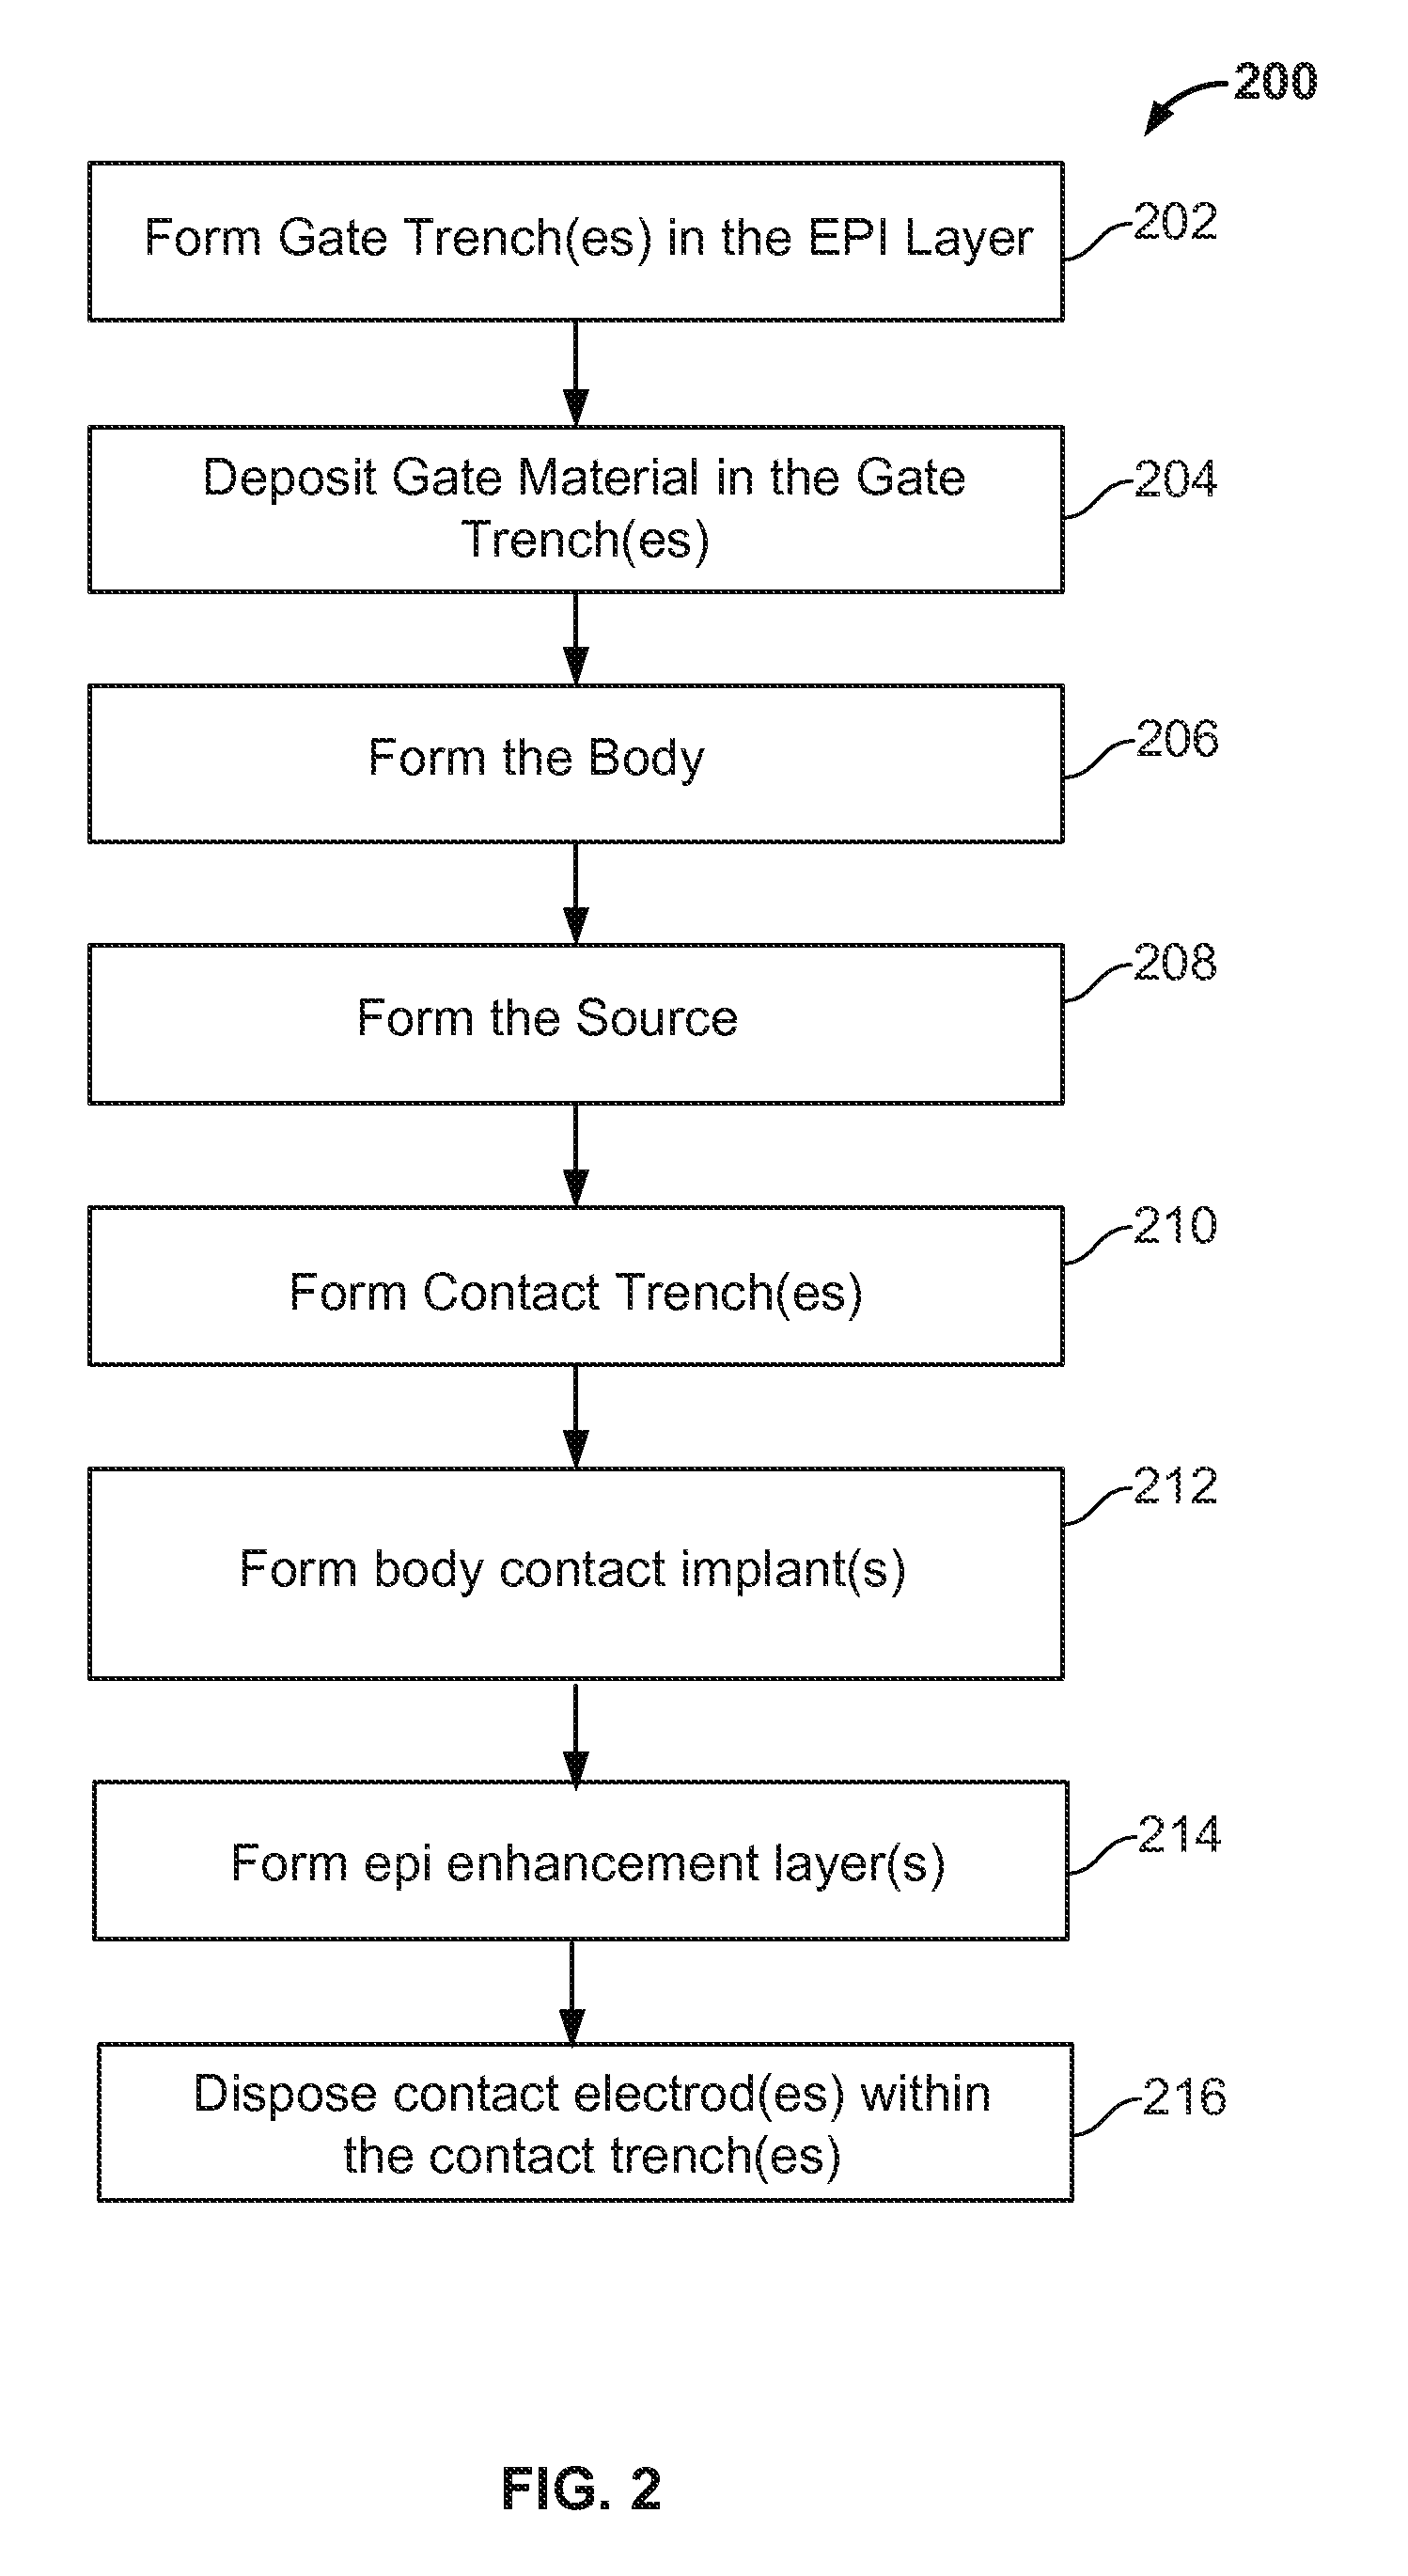 Integrated MOSFET Device and Method with Reduced Kelvin Contact Impedance and Breakdown Voltage